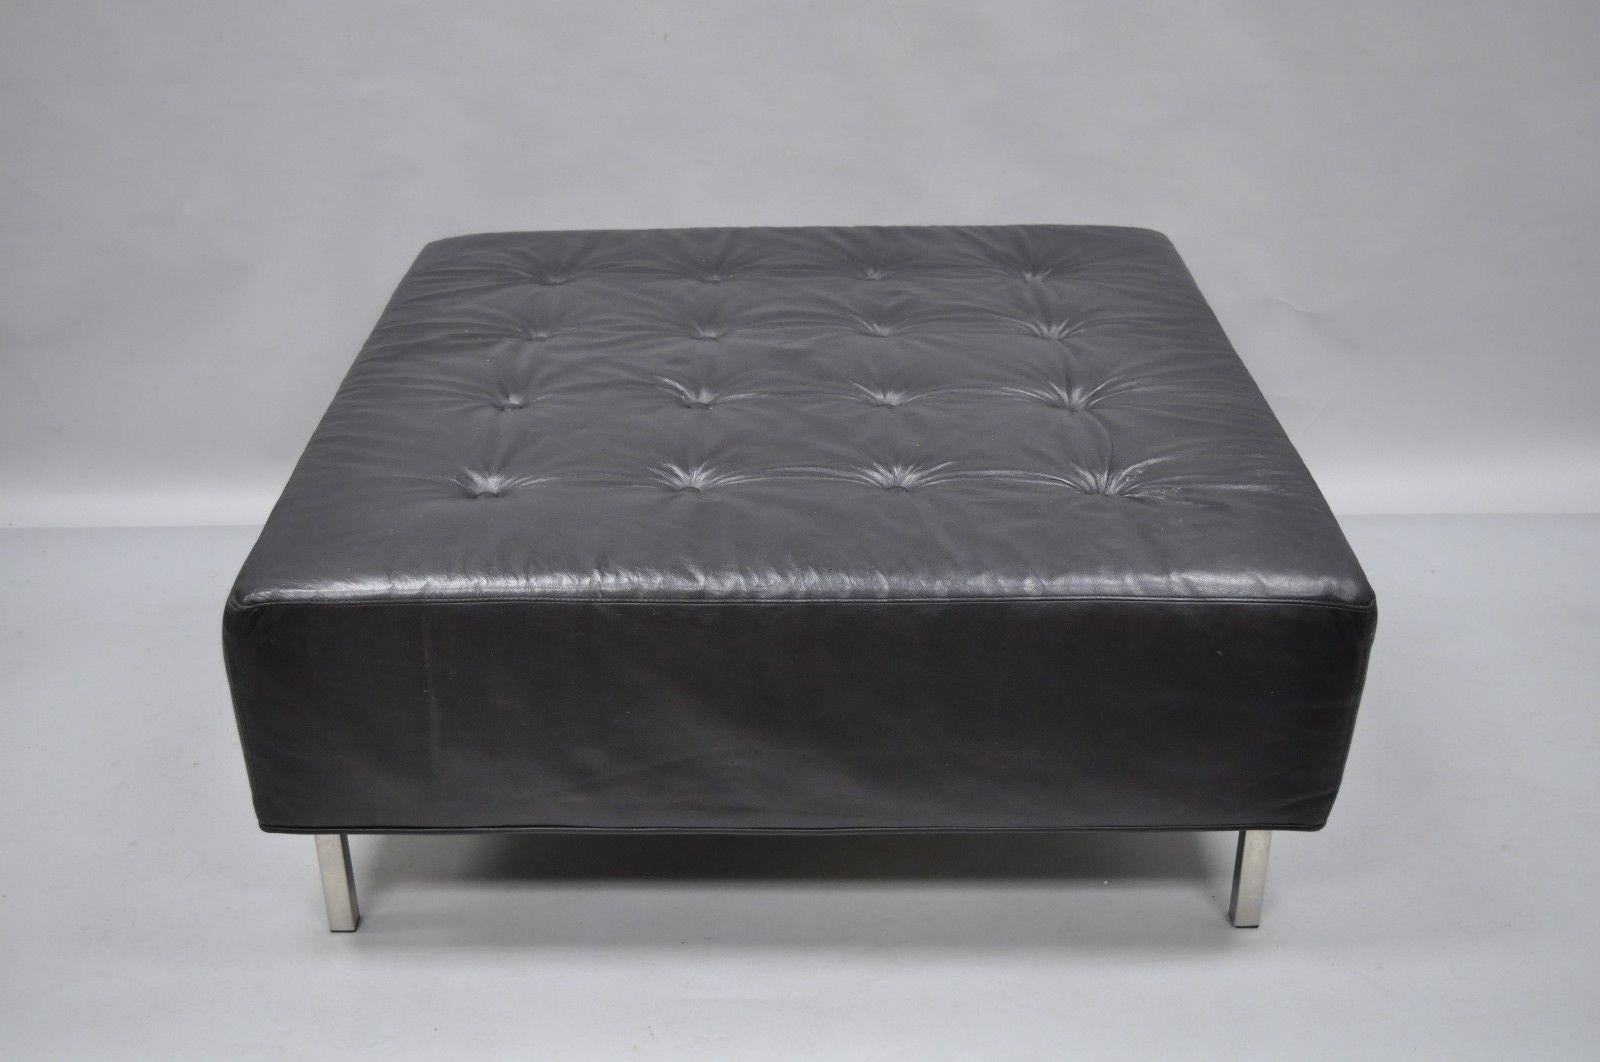 Thayer Coggin black tufted leather ottoman. Item details tufted leather upholstery, original label, metal legs, clean modernist lines, and quality American craftsmanship, circa 2005. Measurements: 16